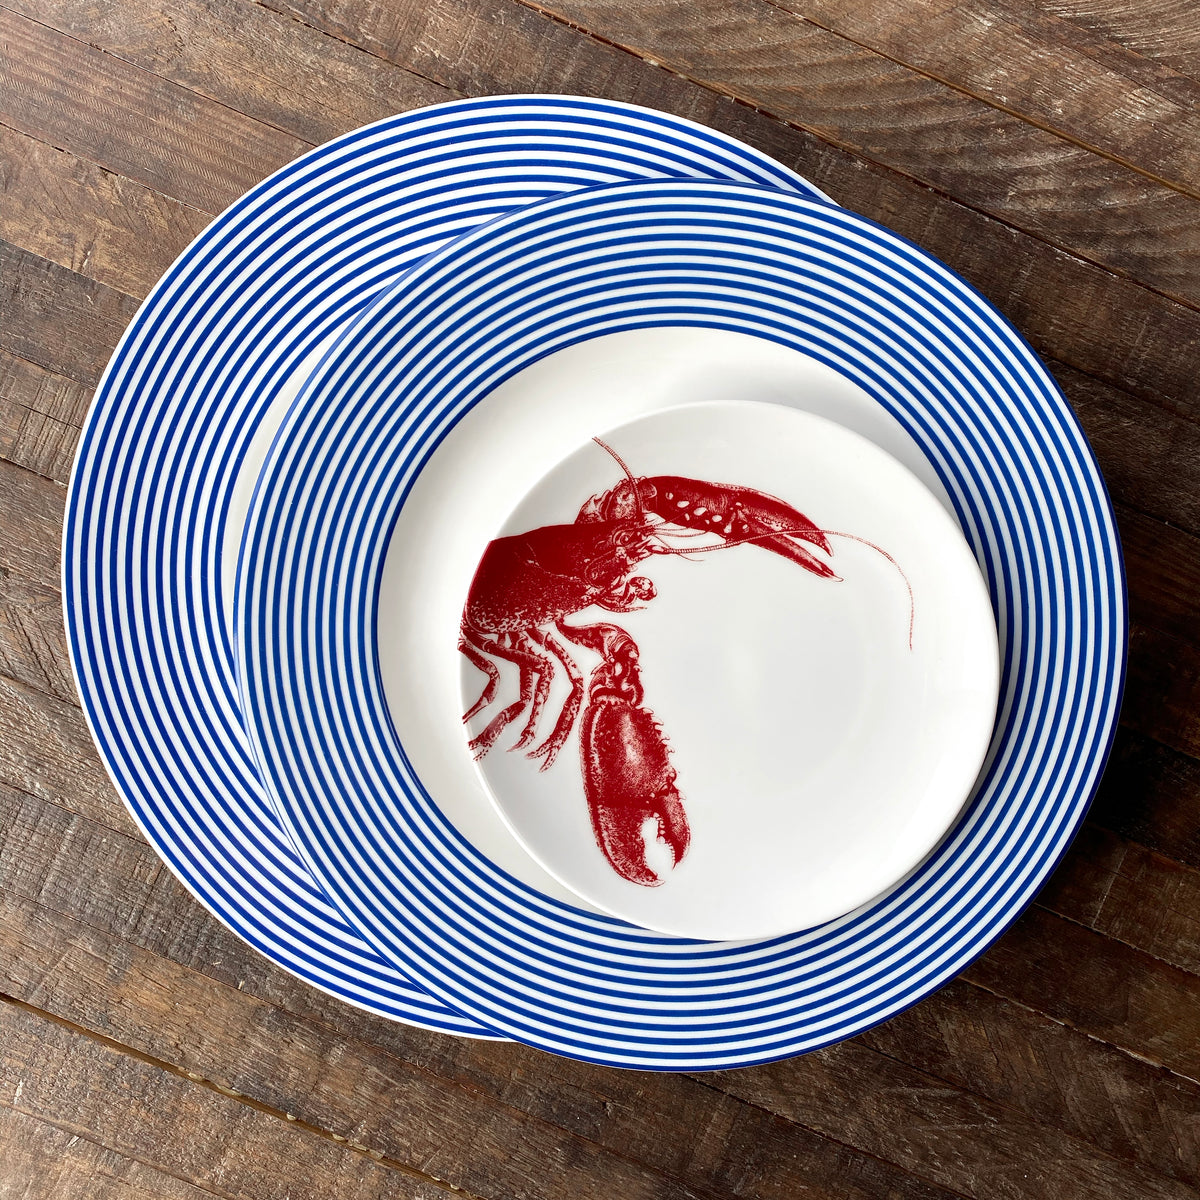 Three nested Lobster Red Small Plates from Caskata Artisanal Home: the smallest has a red lobster illustration, the others have blue stripes. This heirloom-quality dinnerware is placed on a wooden surface, evoking a timeless seaside style.